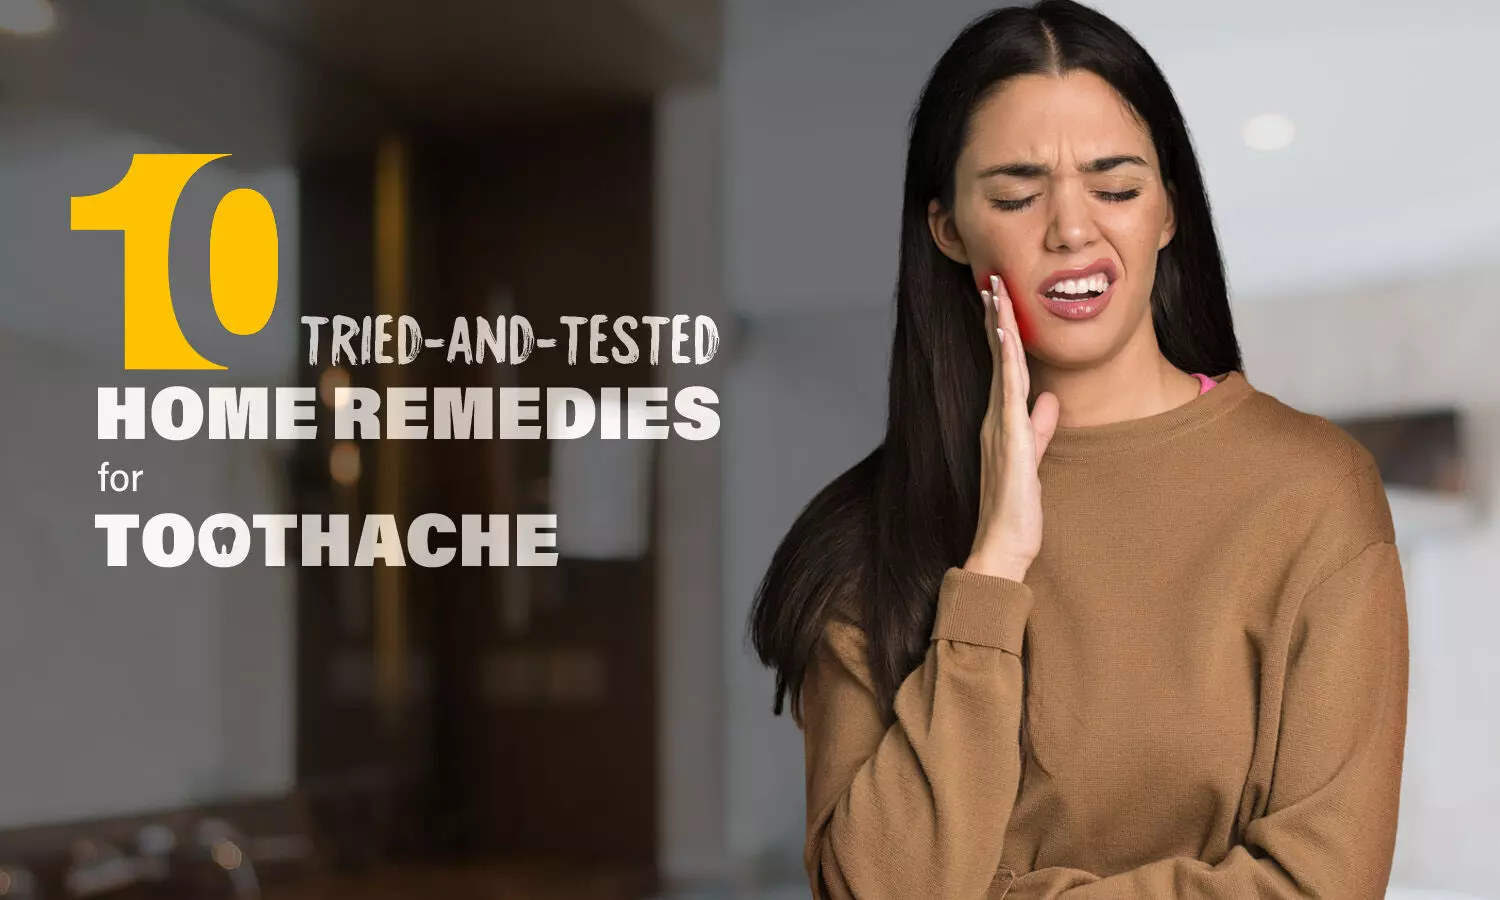 10 Tried-and-Tested home remedies for toothaches